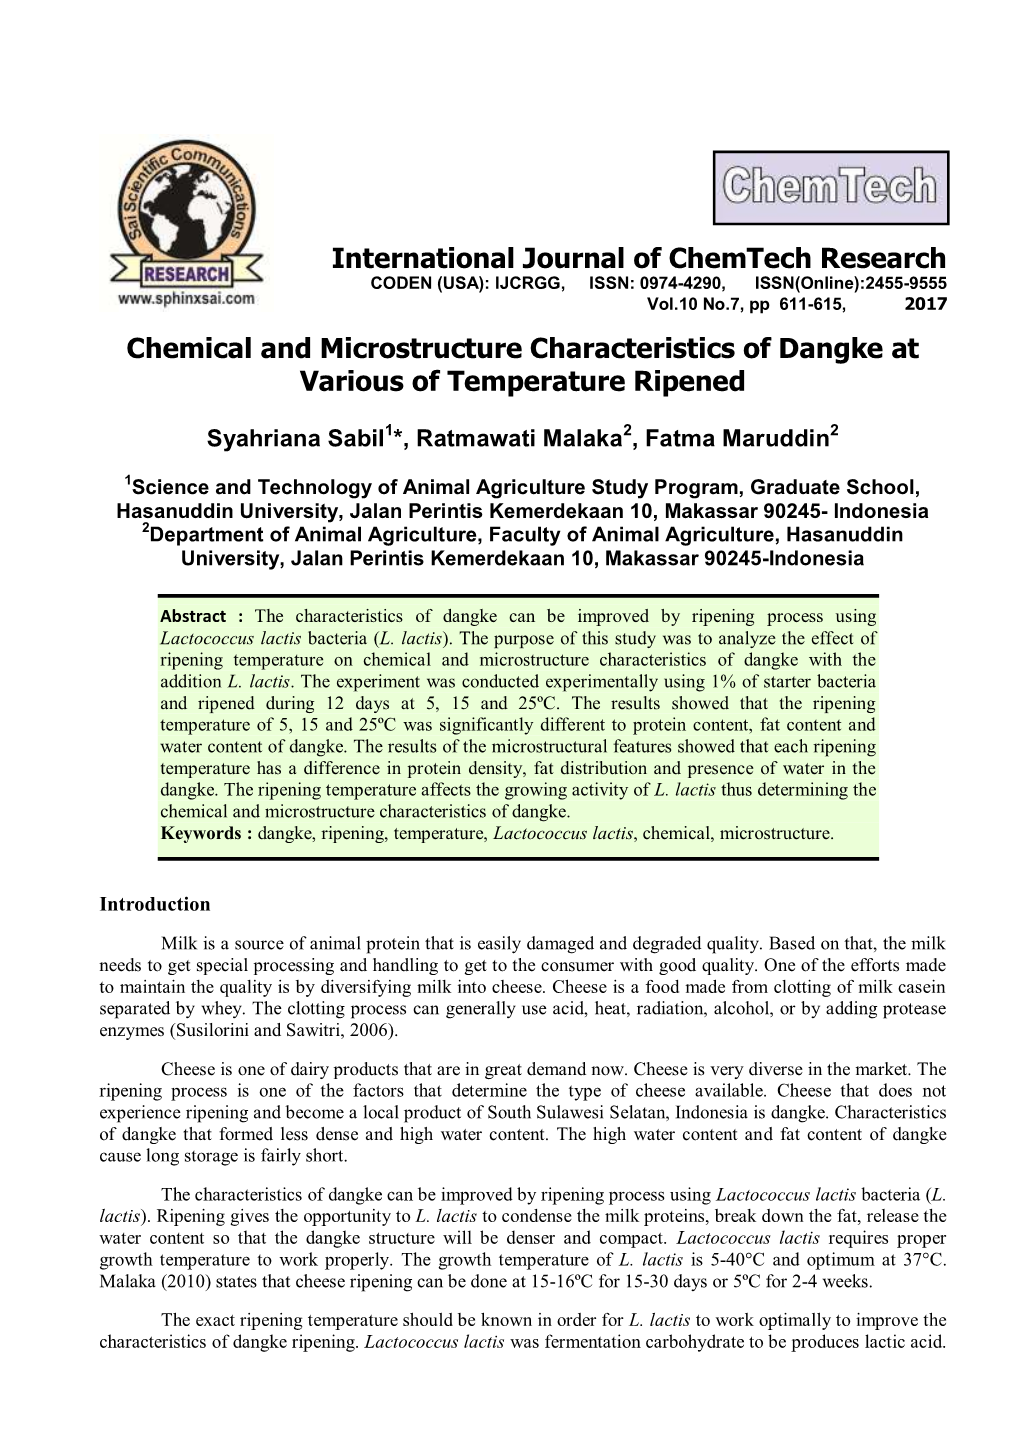 Chemical and Microstructure Characteristics of Dangke at Various of Temperature Ripened